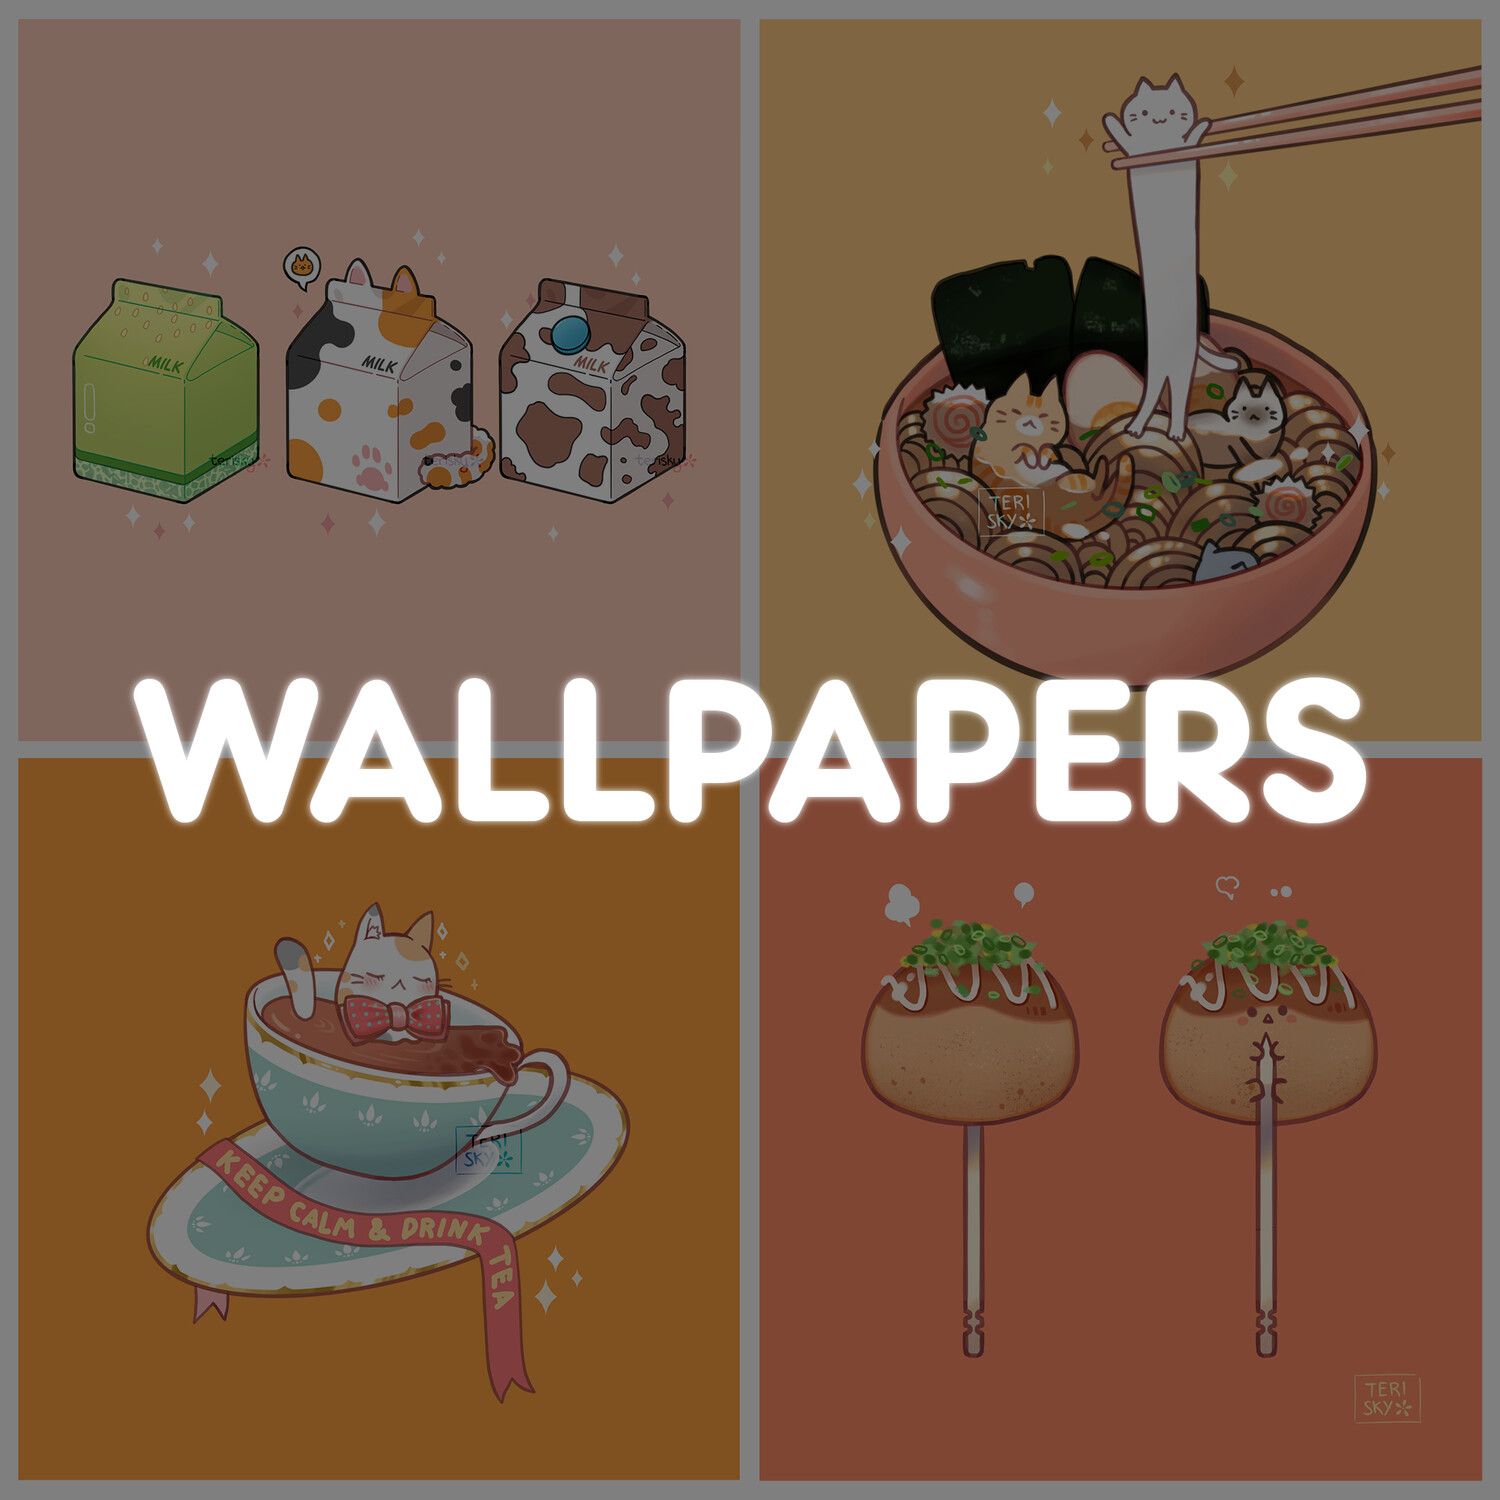 Wallpapers with cats, food and other items - Foodie